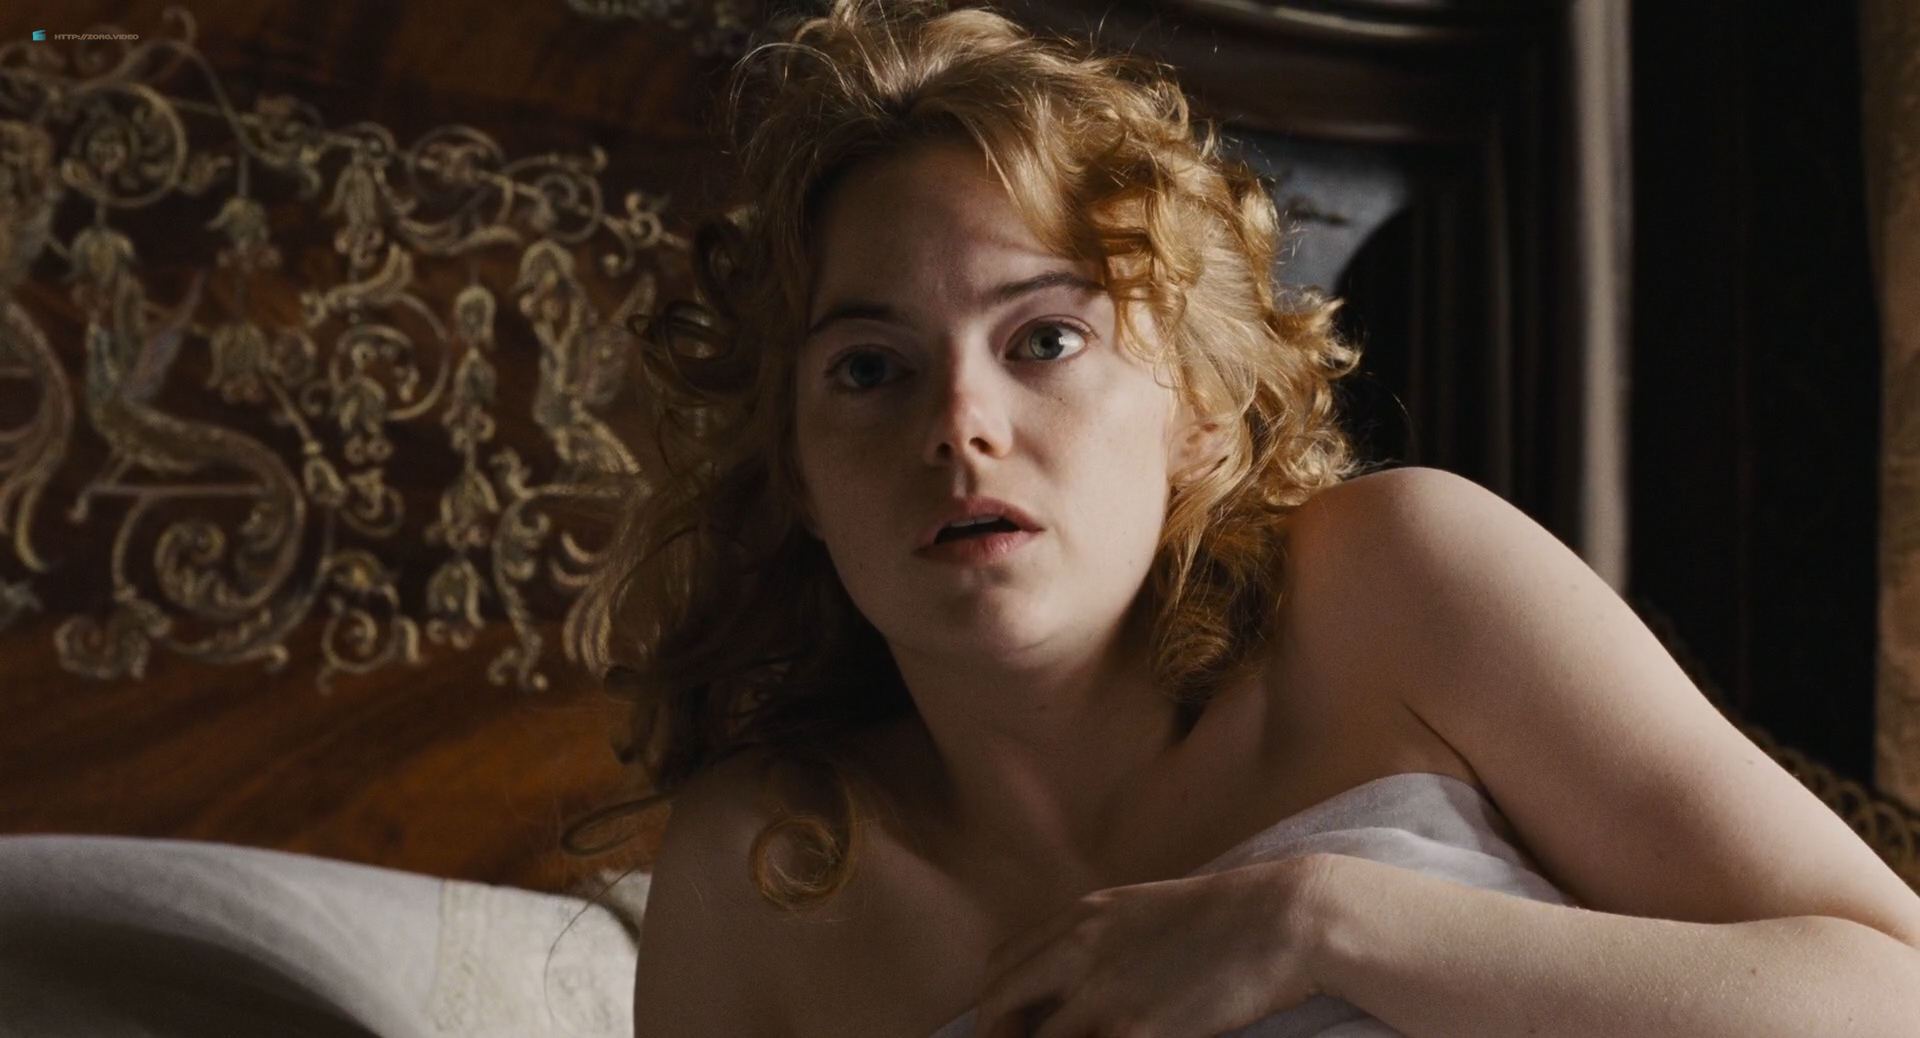 0113024933392_04_Emma-Stone-nude-topless-The-Favorite-2018-HD-1080p-Web-000...